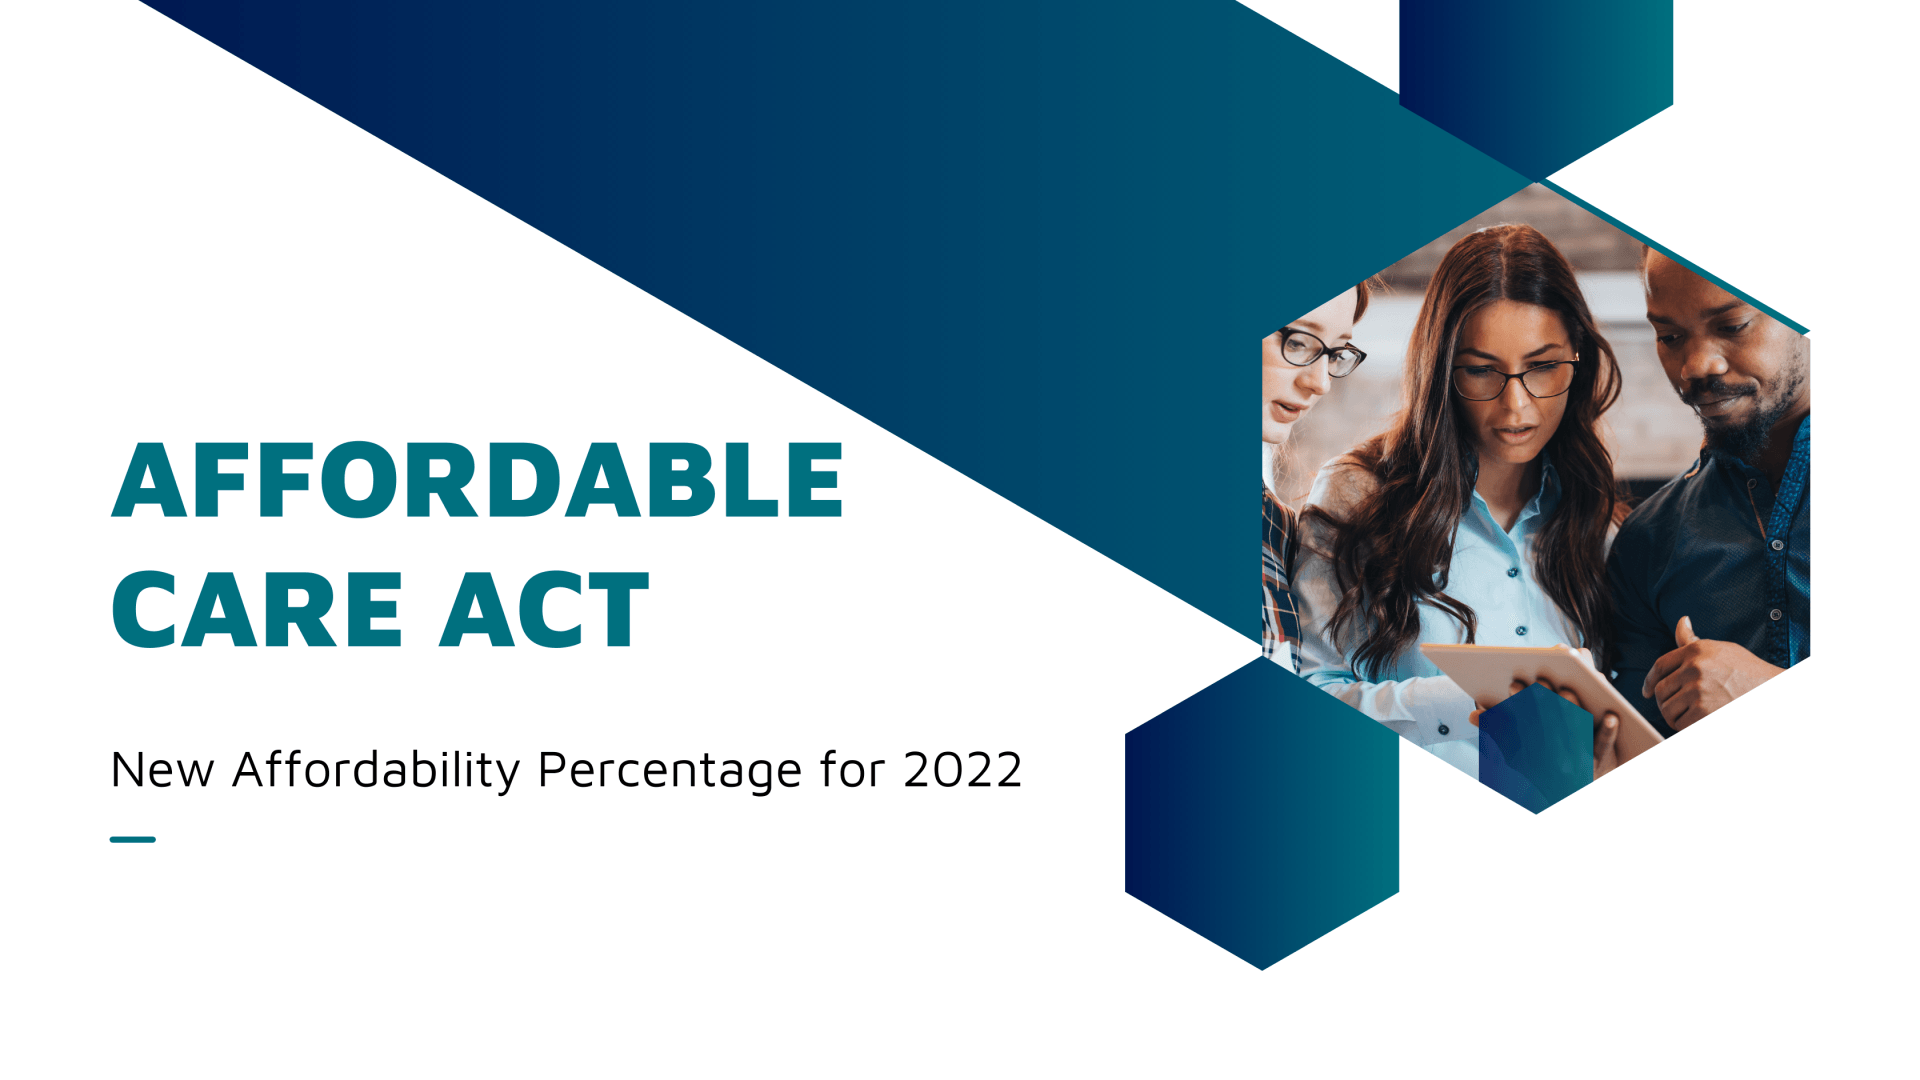 Affordable Care Act New Affordability Percentage for 2022